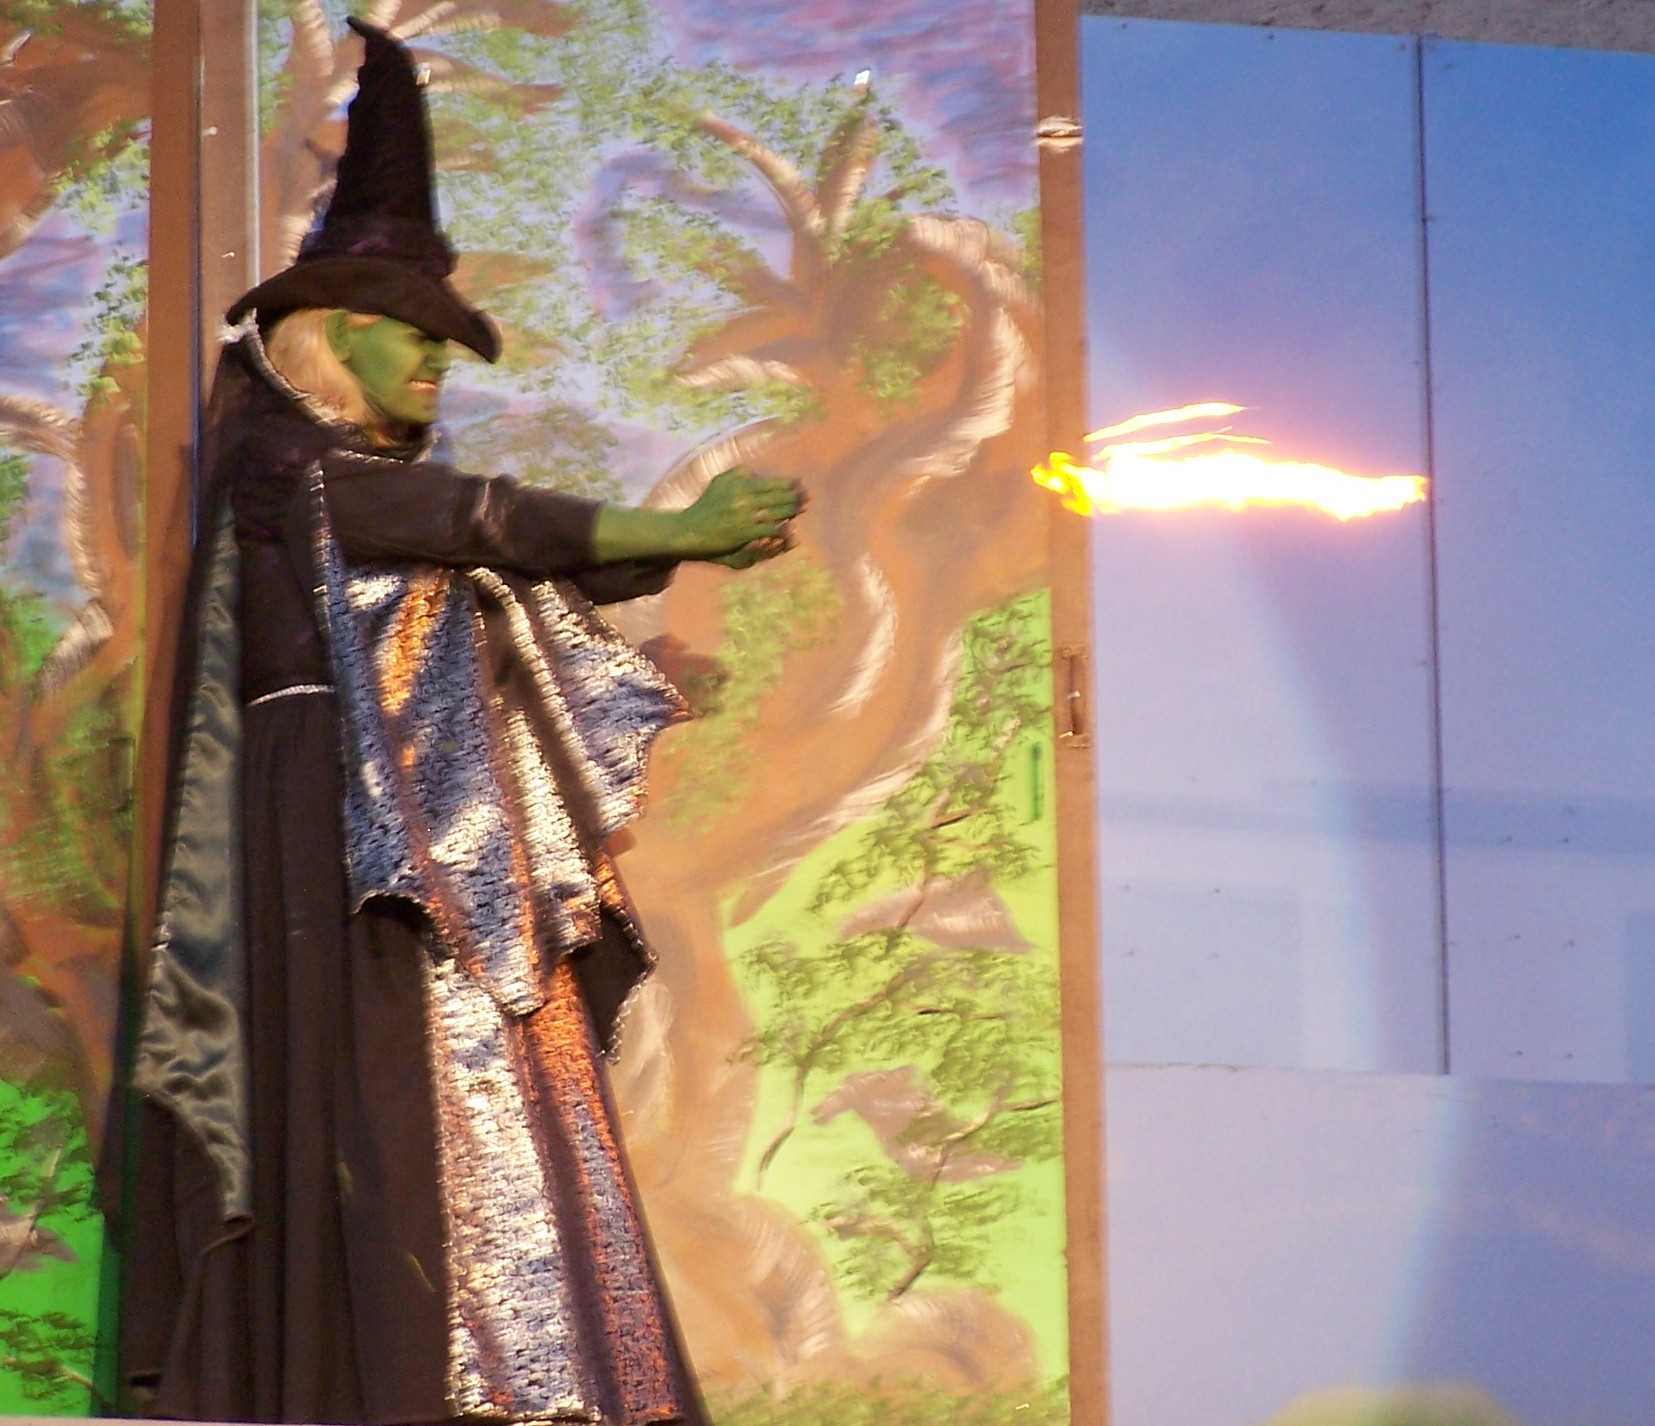 June as Wicked Witch